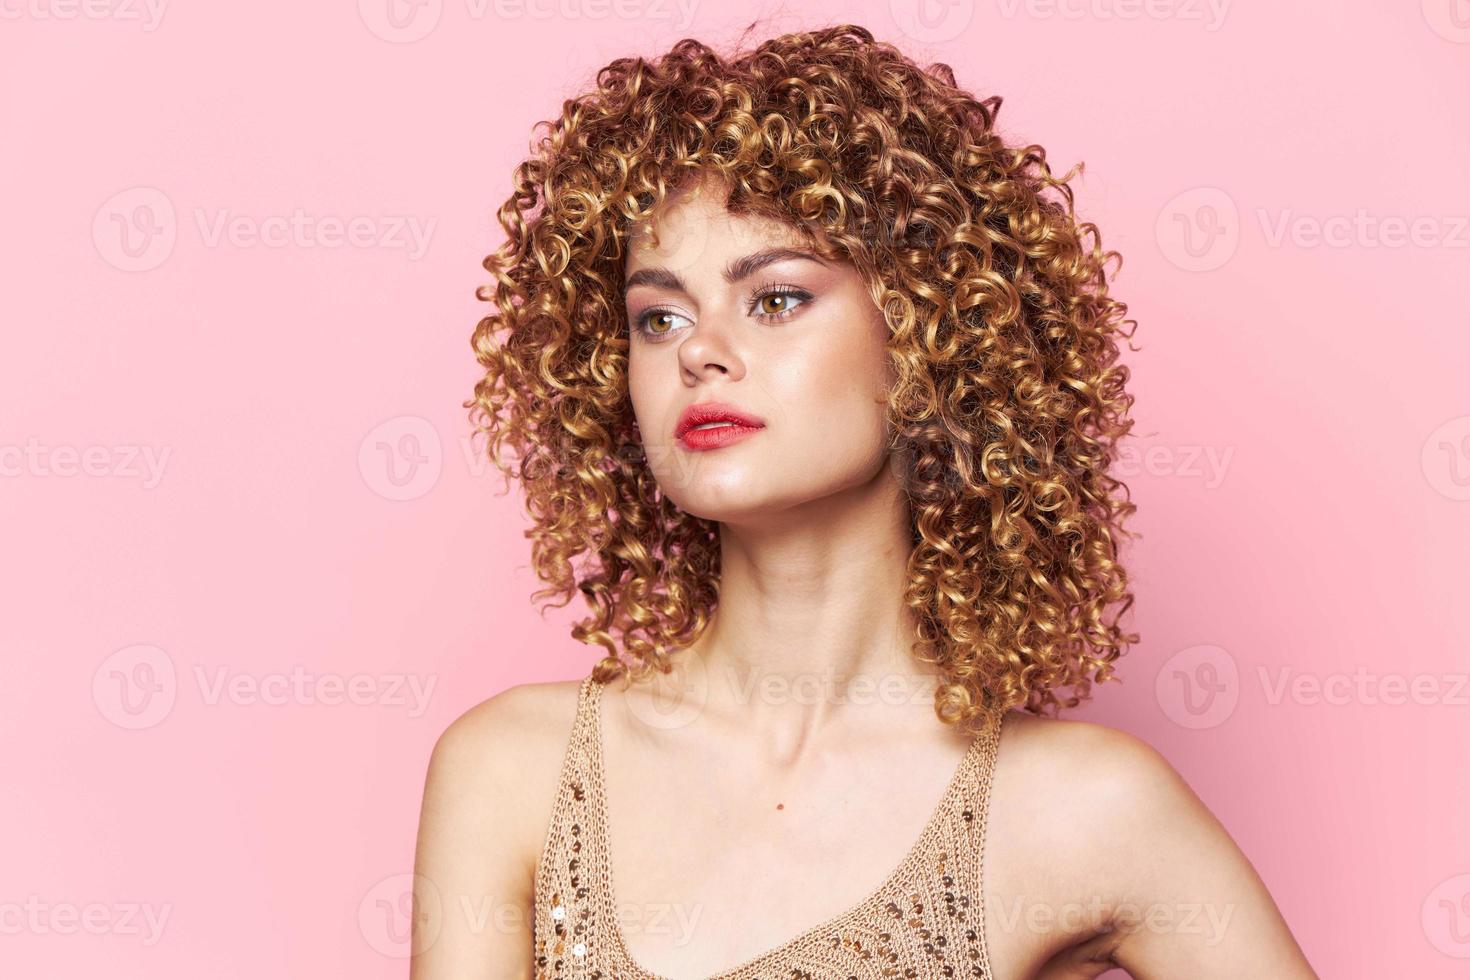 Lady curly hair red lips charm bright makeup photo